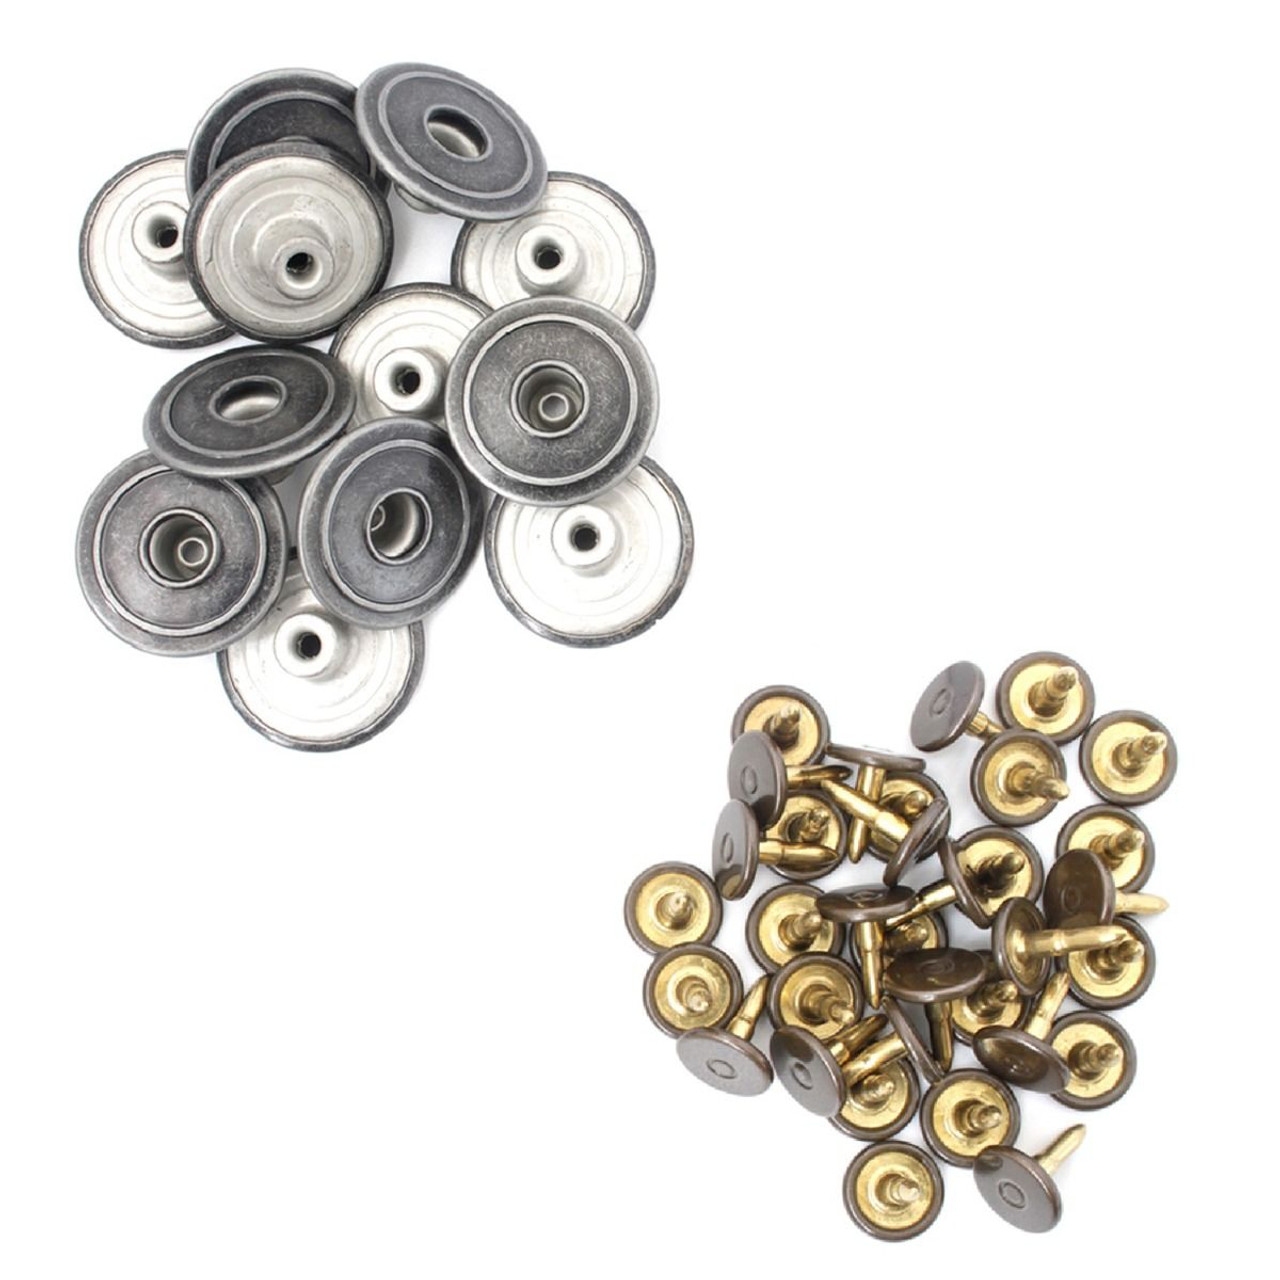 KAM 22mm Jean Buttons Gunmetal Snap Fastener Adjustable Durable No Sew  Metal Buttons for Repair Clothing - 10pcs